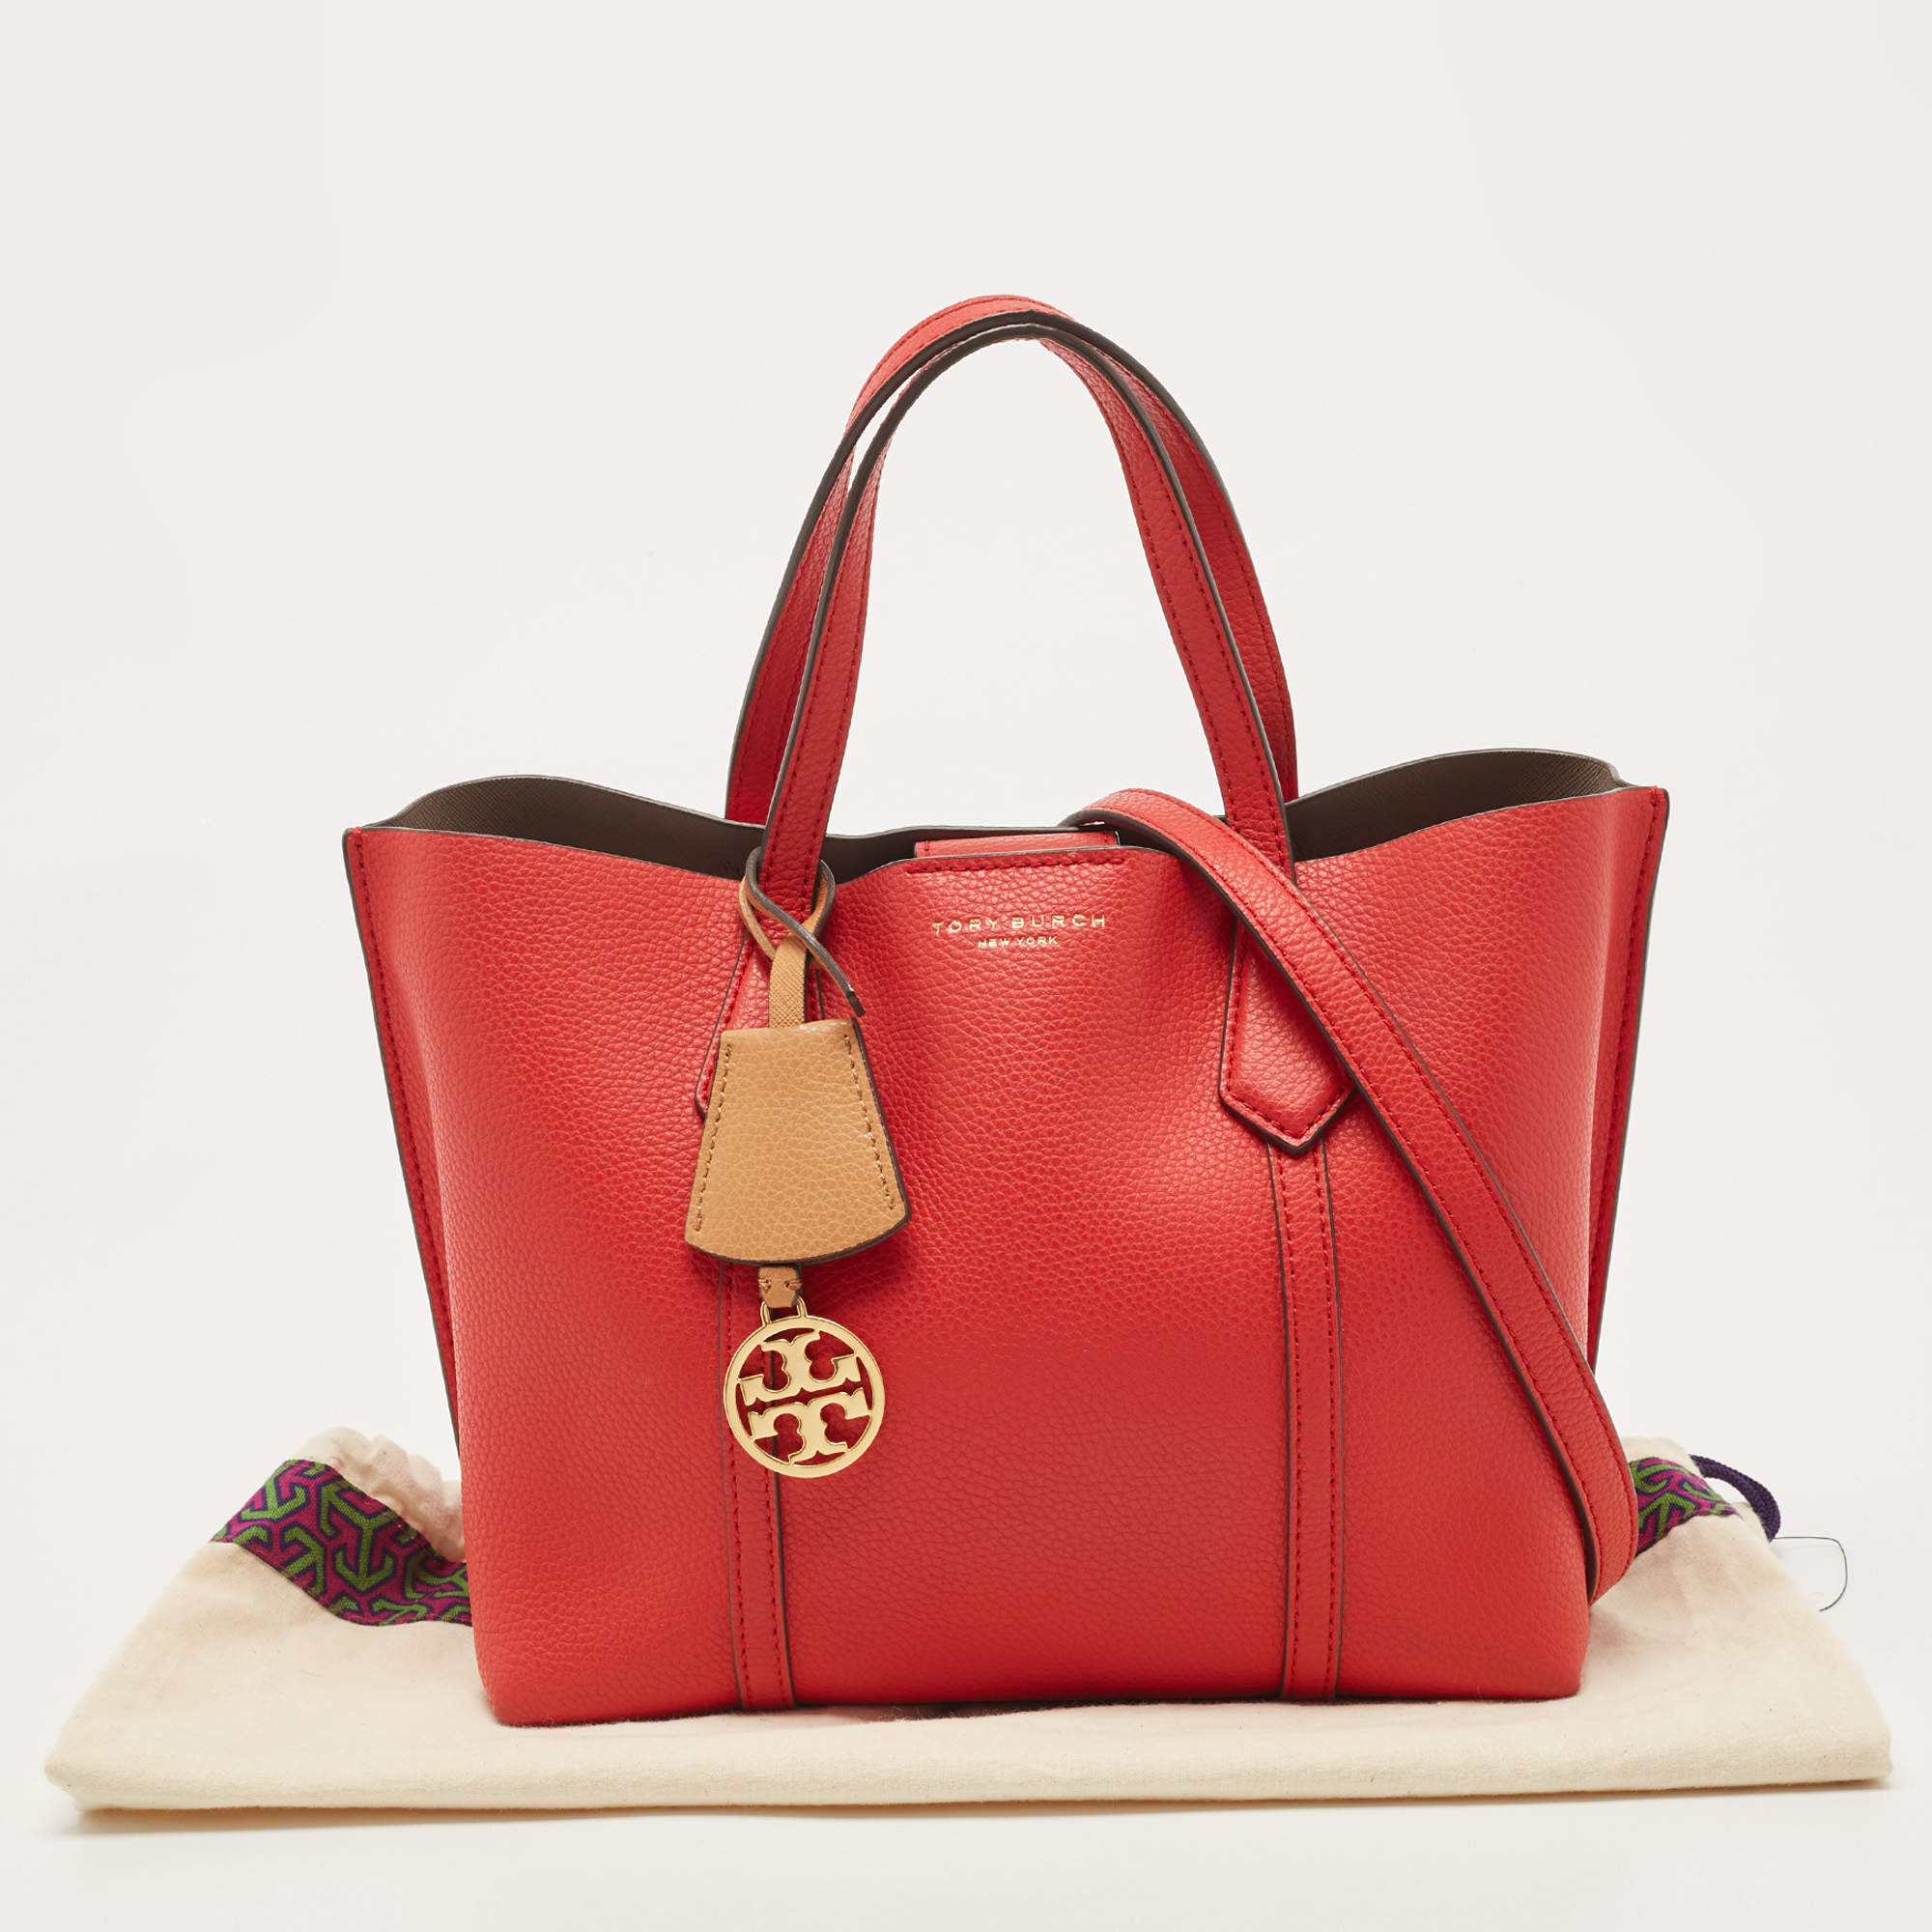 Tory Burch Robinson Medium Triple-Compartment Leather Tote Bag